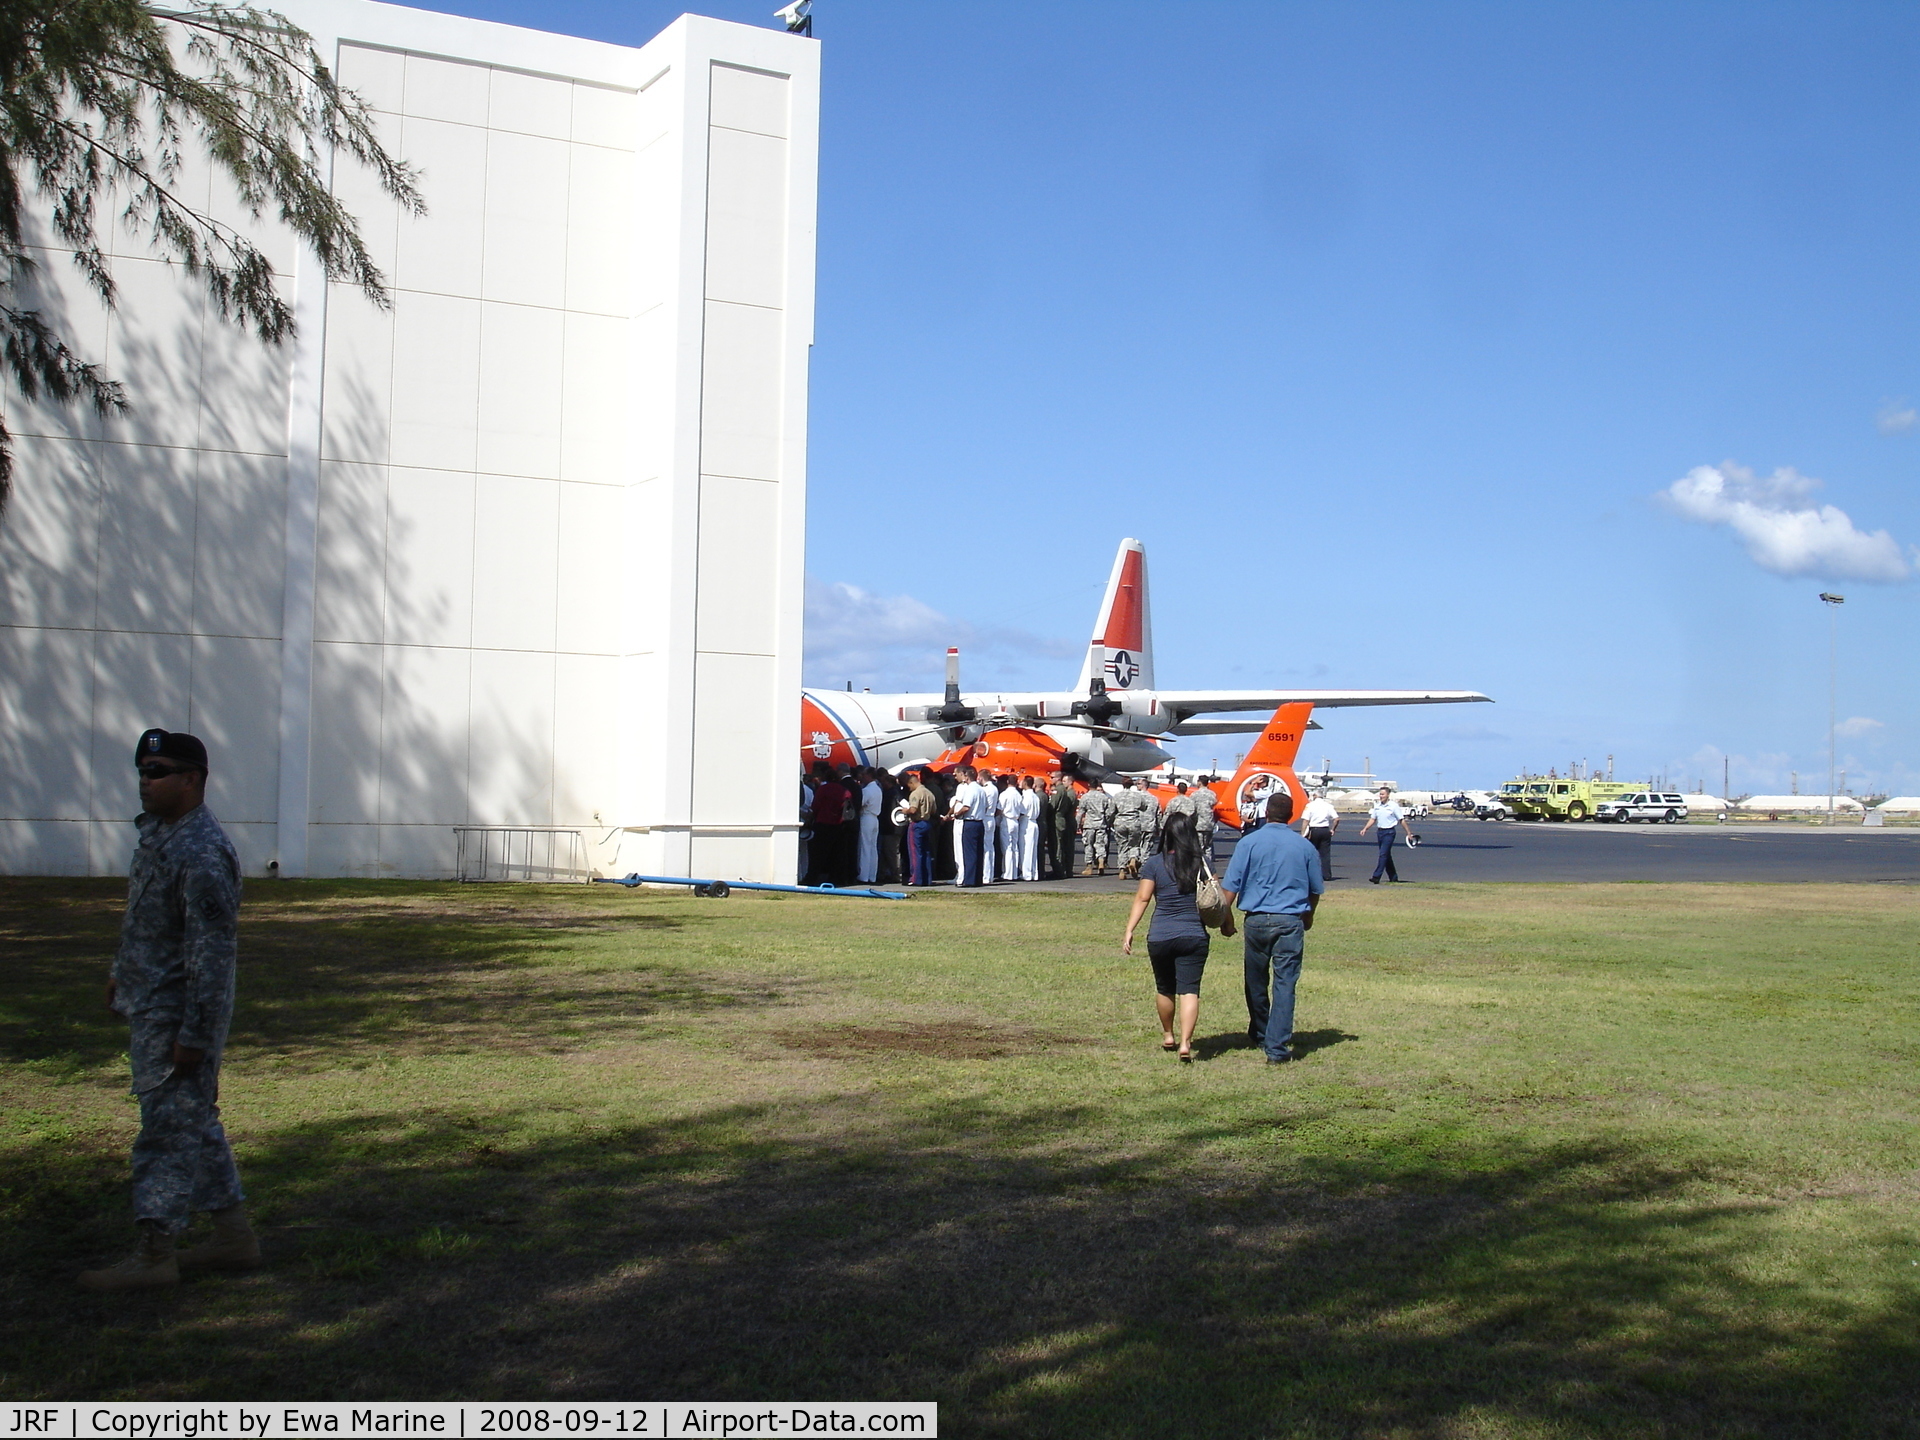 Kalaeloa (john Rodgers Field) Airport (JRF) - CGAS Barbers Point Hangar....1 Coral Sea Road....Kalaeloa Airport. 
pic was taken prior to memorial services for HH65 Dolphin CG 6505's crew. Tom Nelson, Andy Wischmier, Dave Skimins, Josh Nichols were all KIA.  